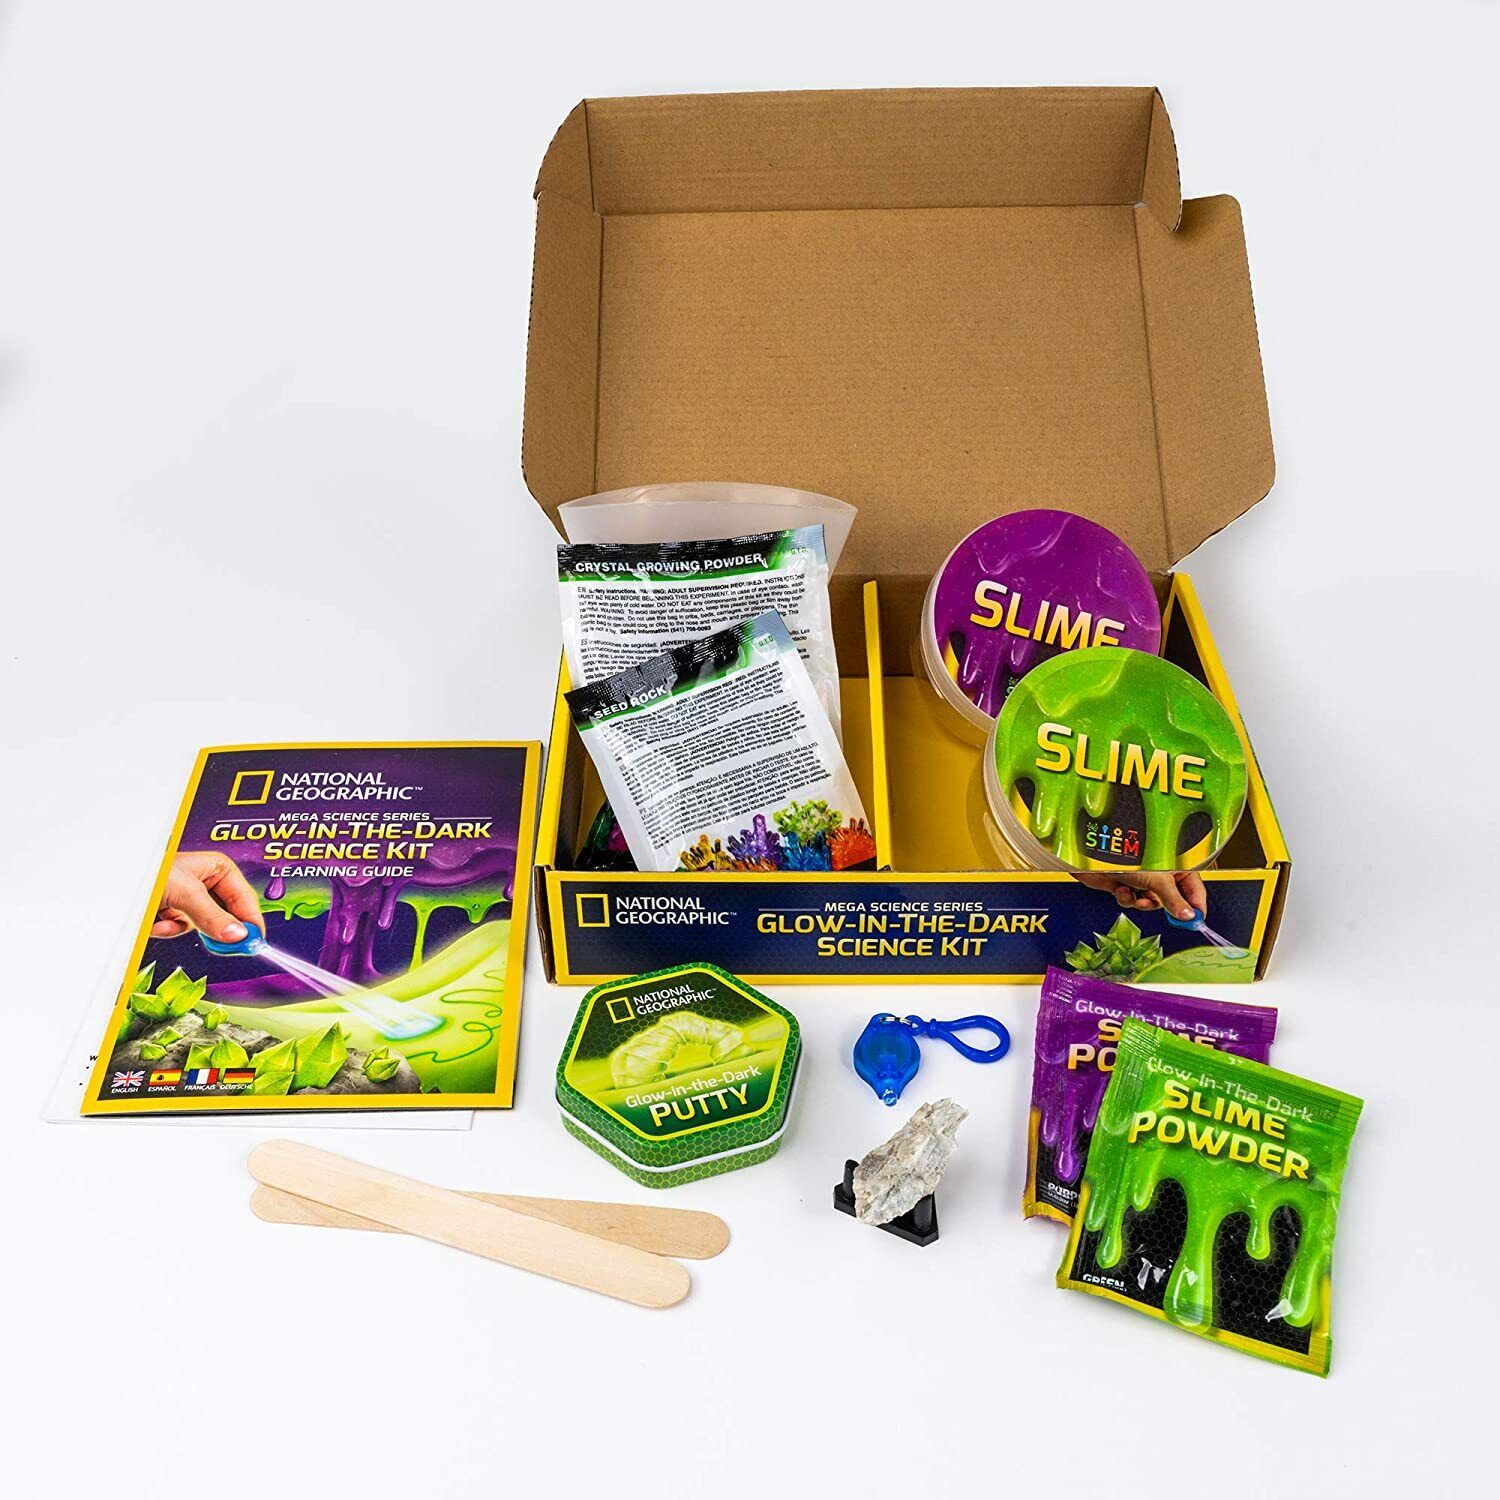 New National Geographic Glow In The Dark Science Kit - Mega Science Series